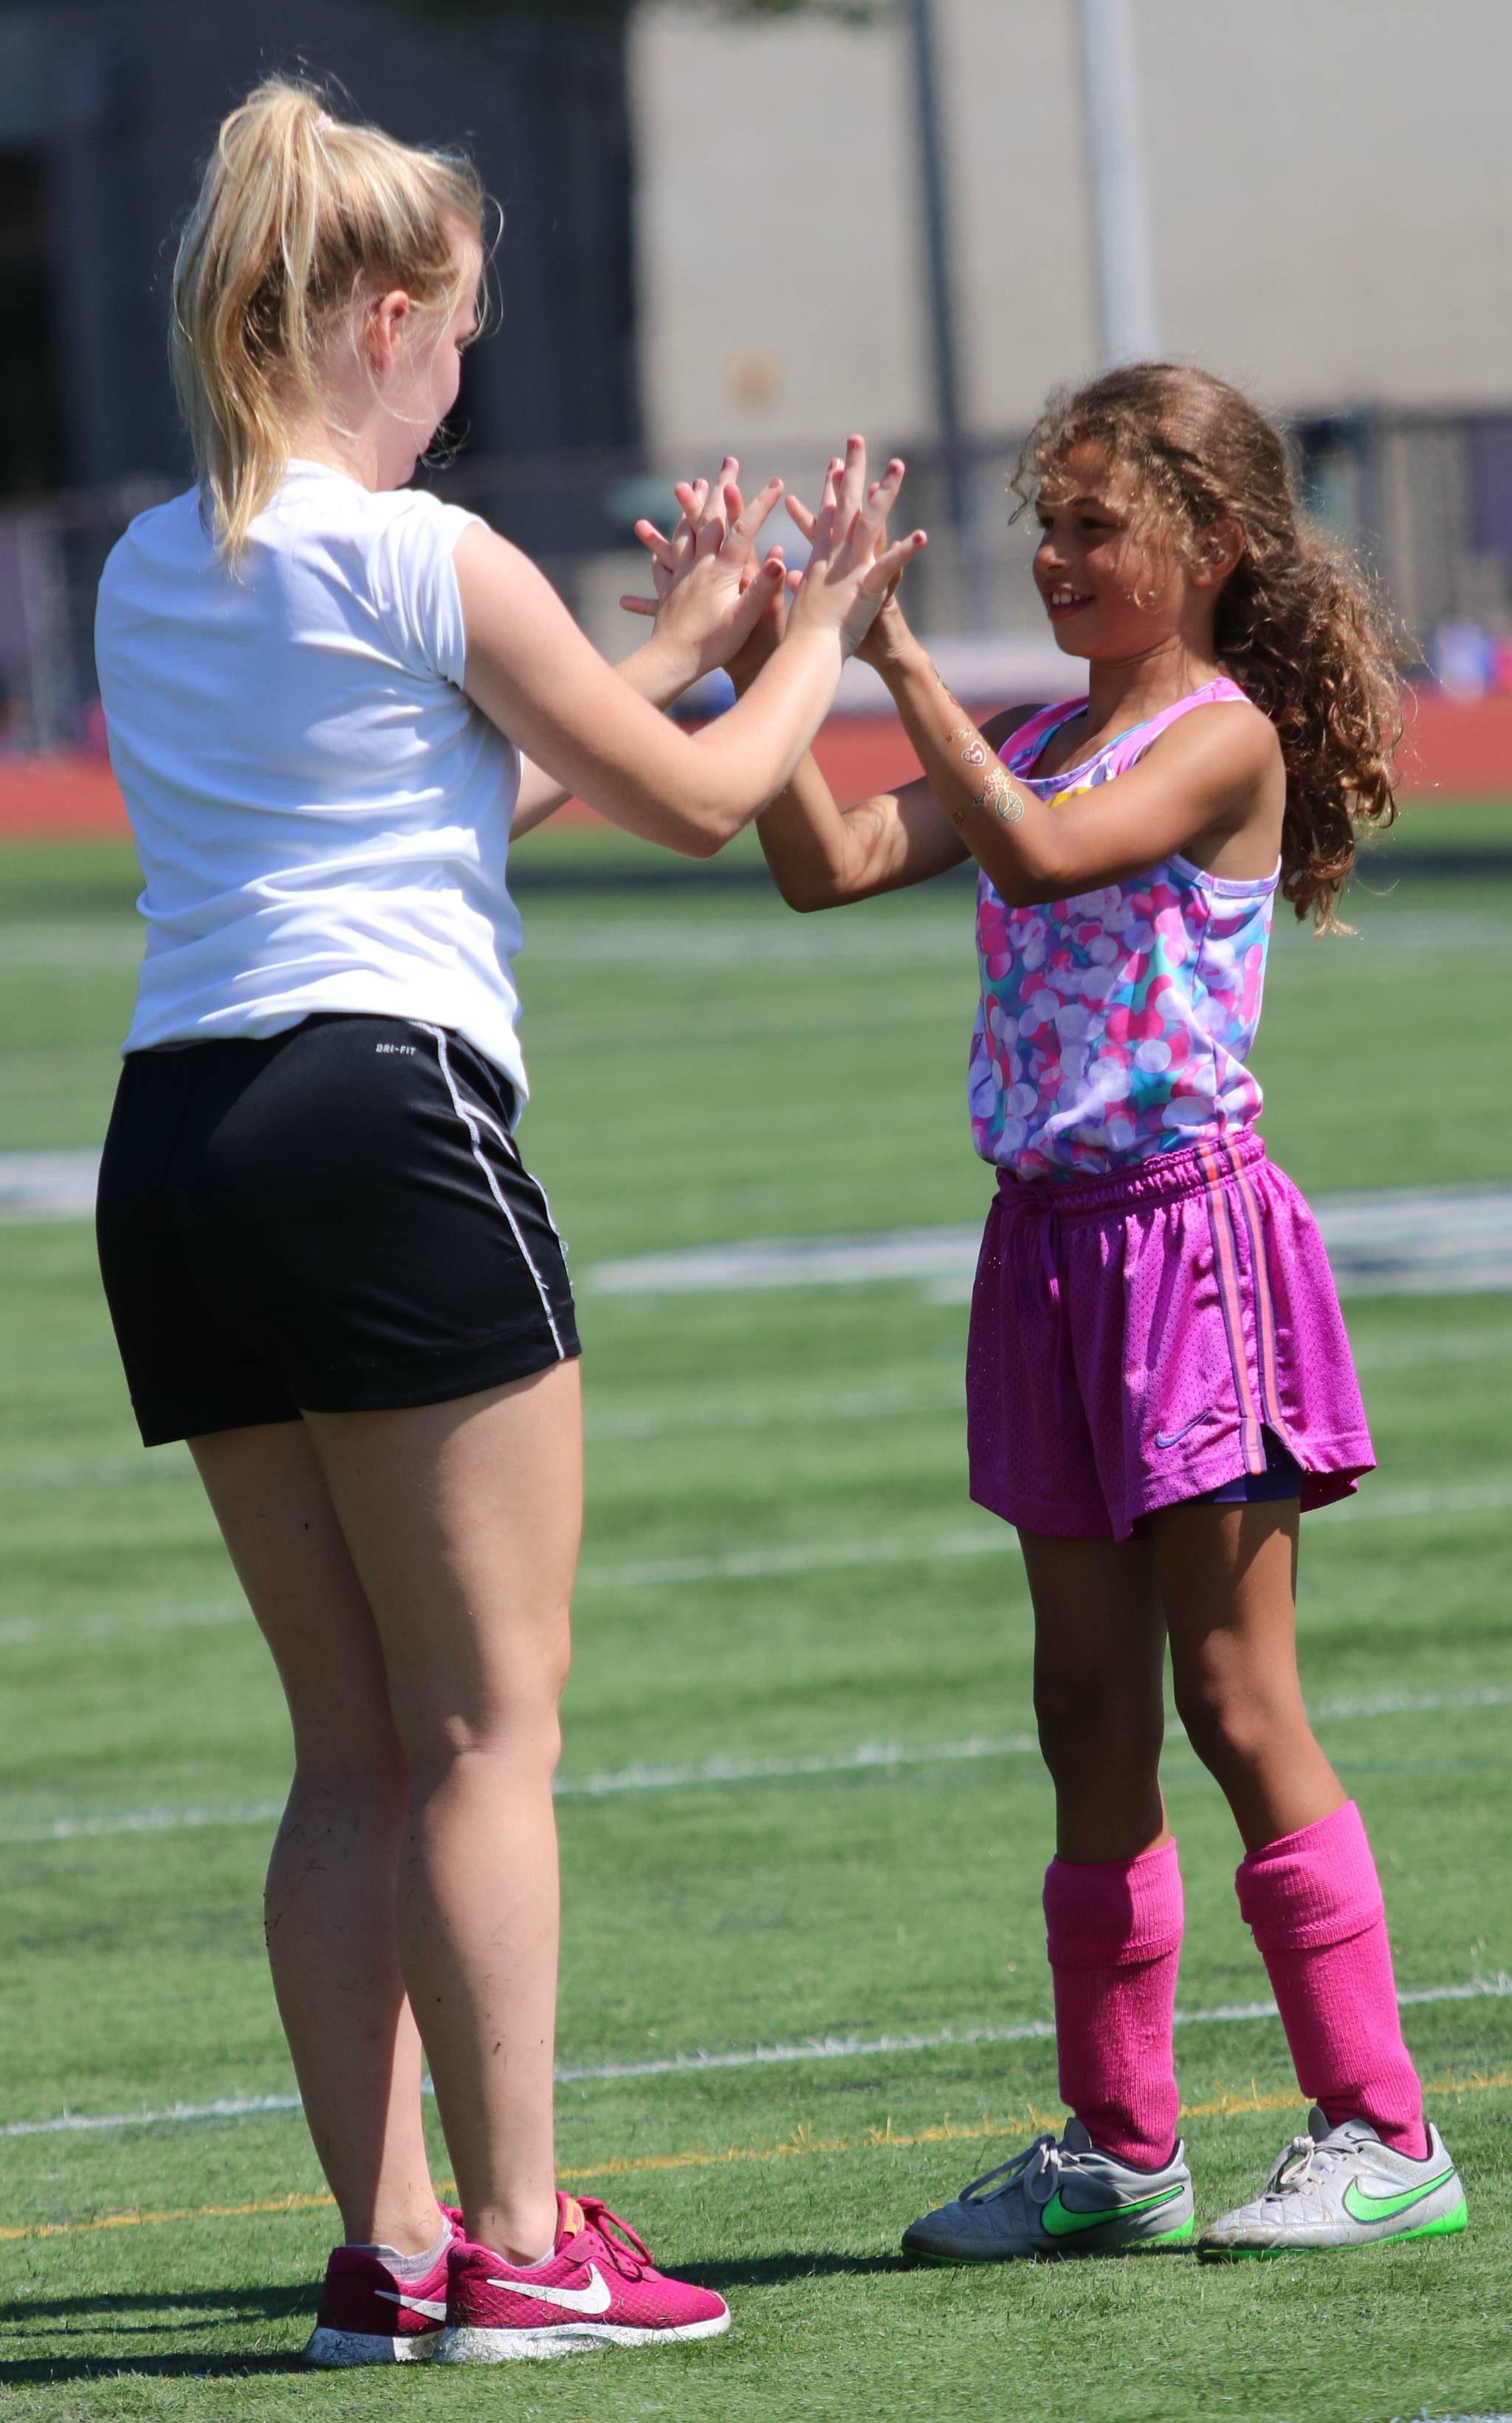 Camper Daisy Walker in pink and Redmond High player Ella Polly bond at camp. Andy Nystrom / staff photo